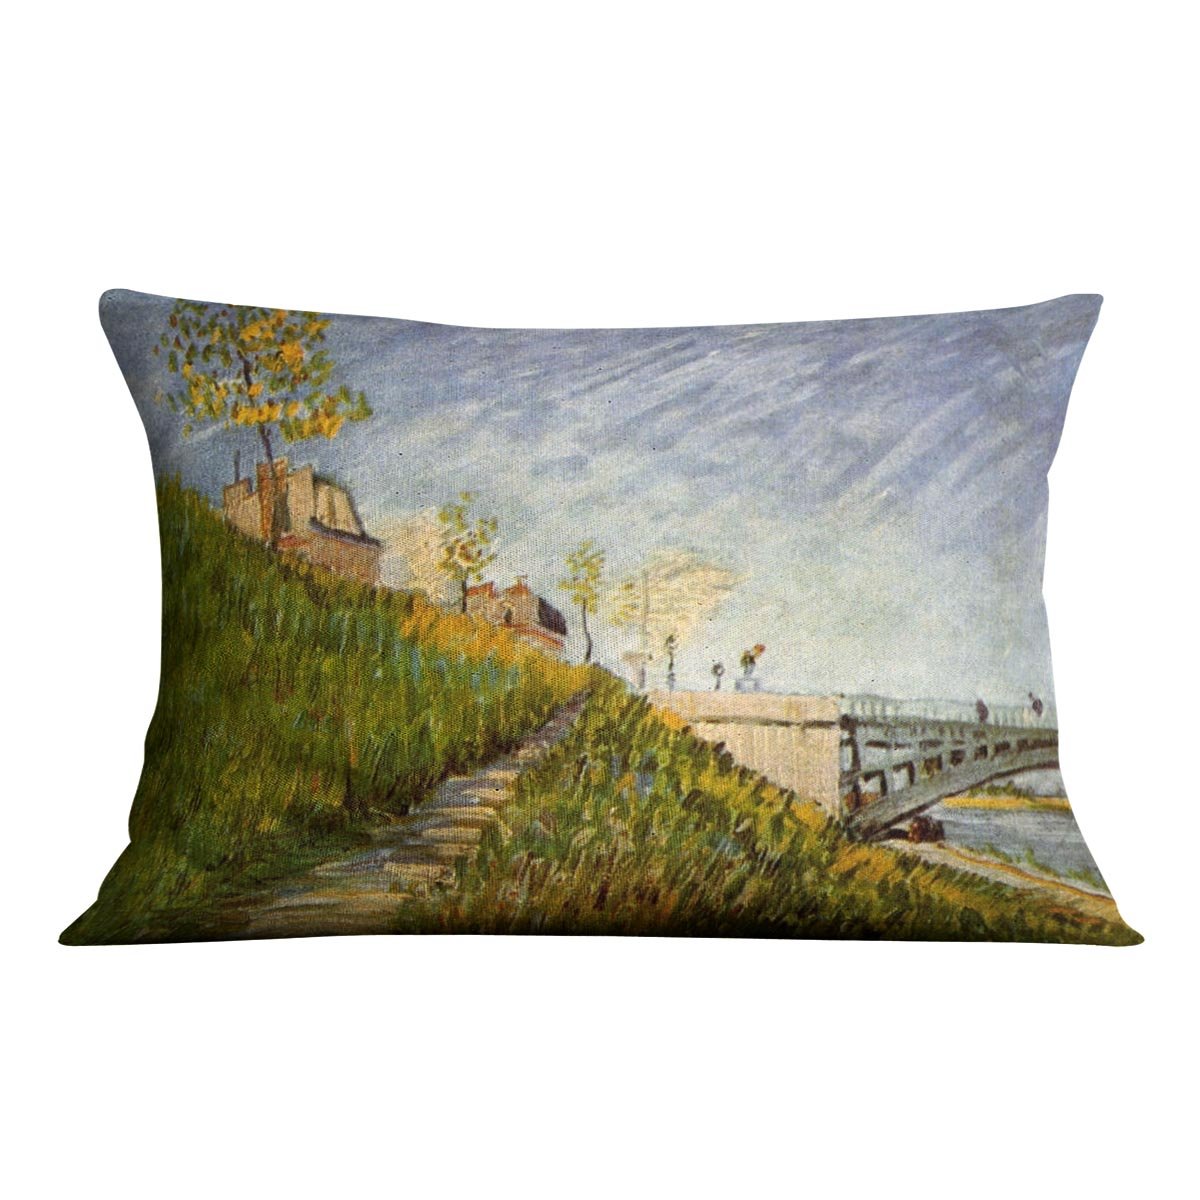 Banks of the Seine with Pont de Clichy by Van Gogh Throw Pillow